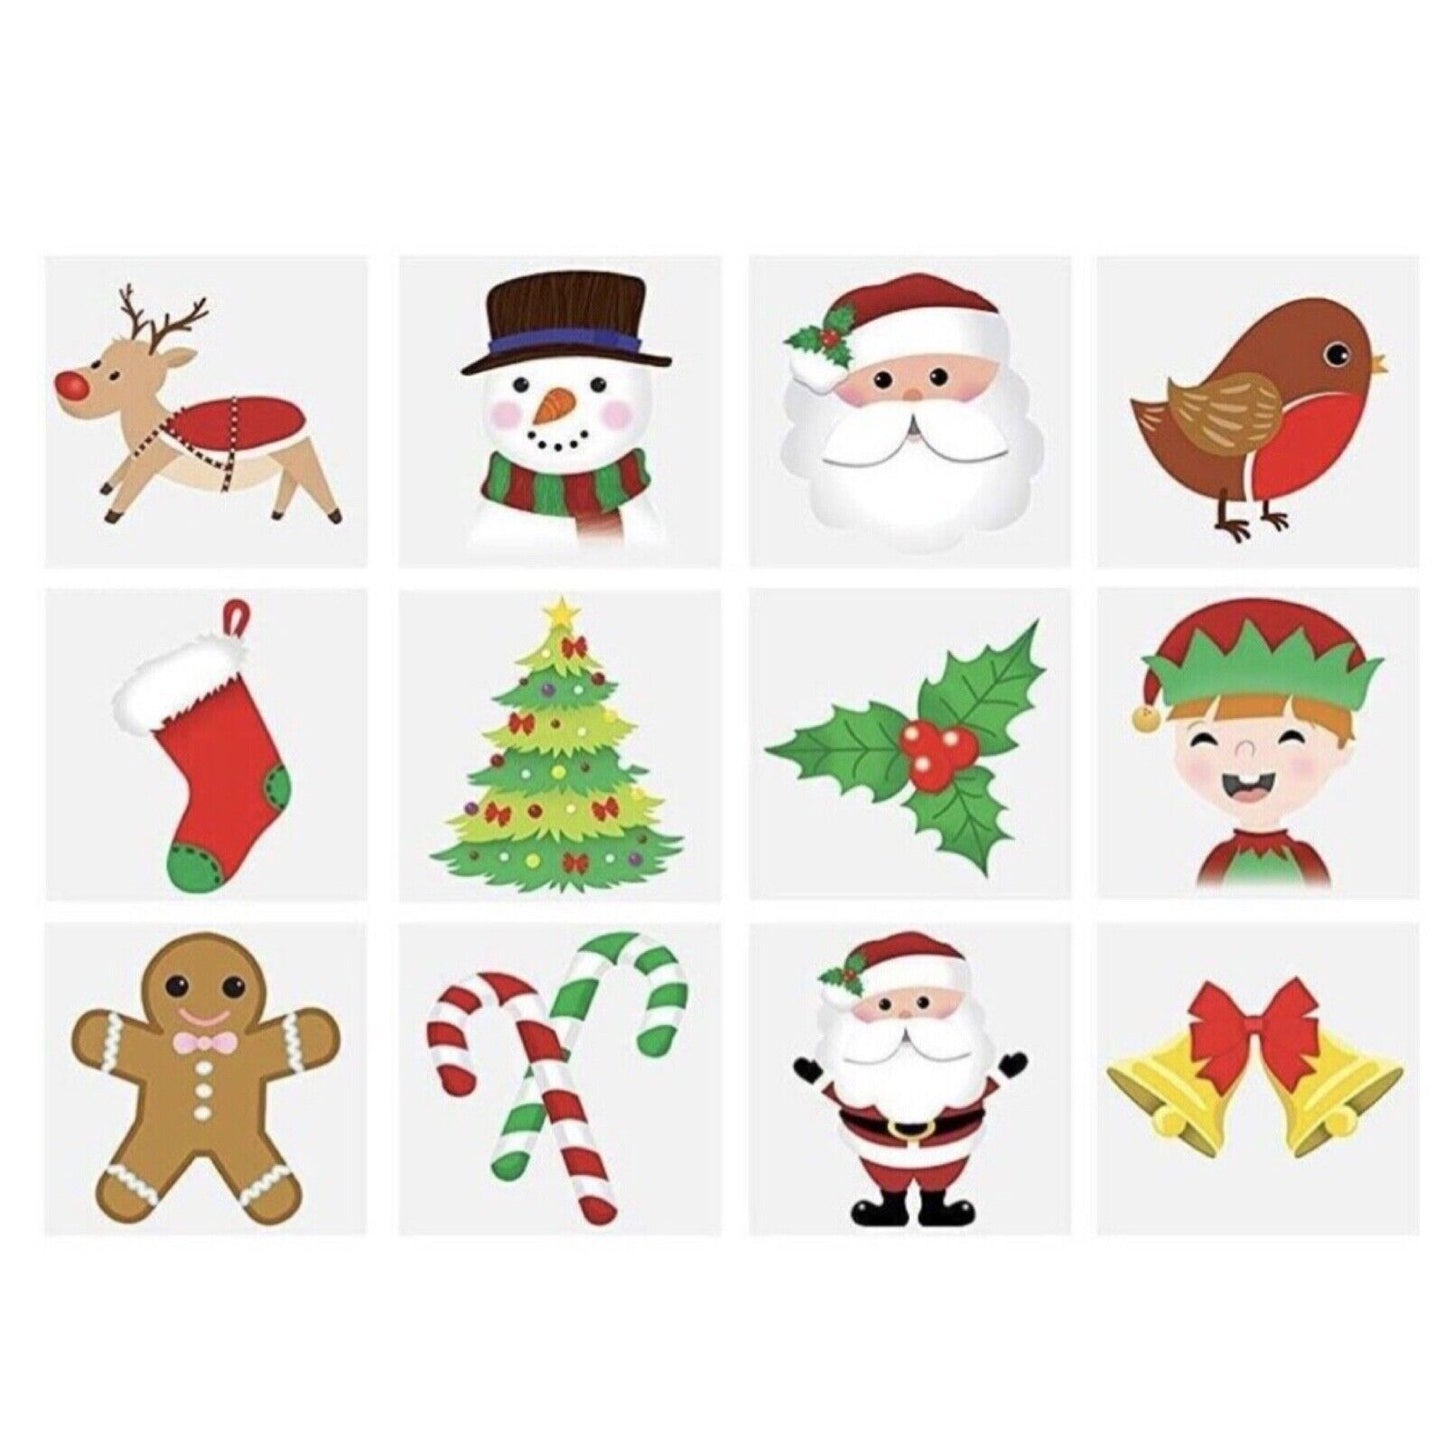 48x Henbrandt Christmas Temporary Tattoos for Christmas Stockings Party Fillers